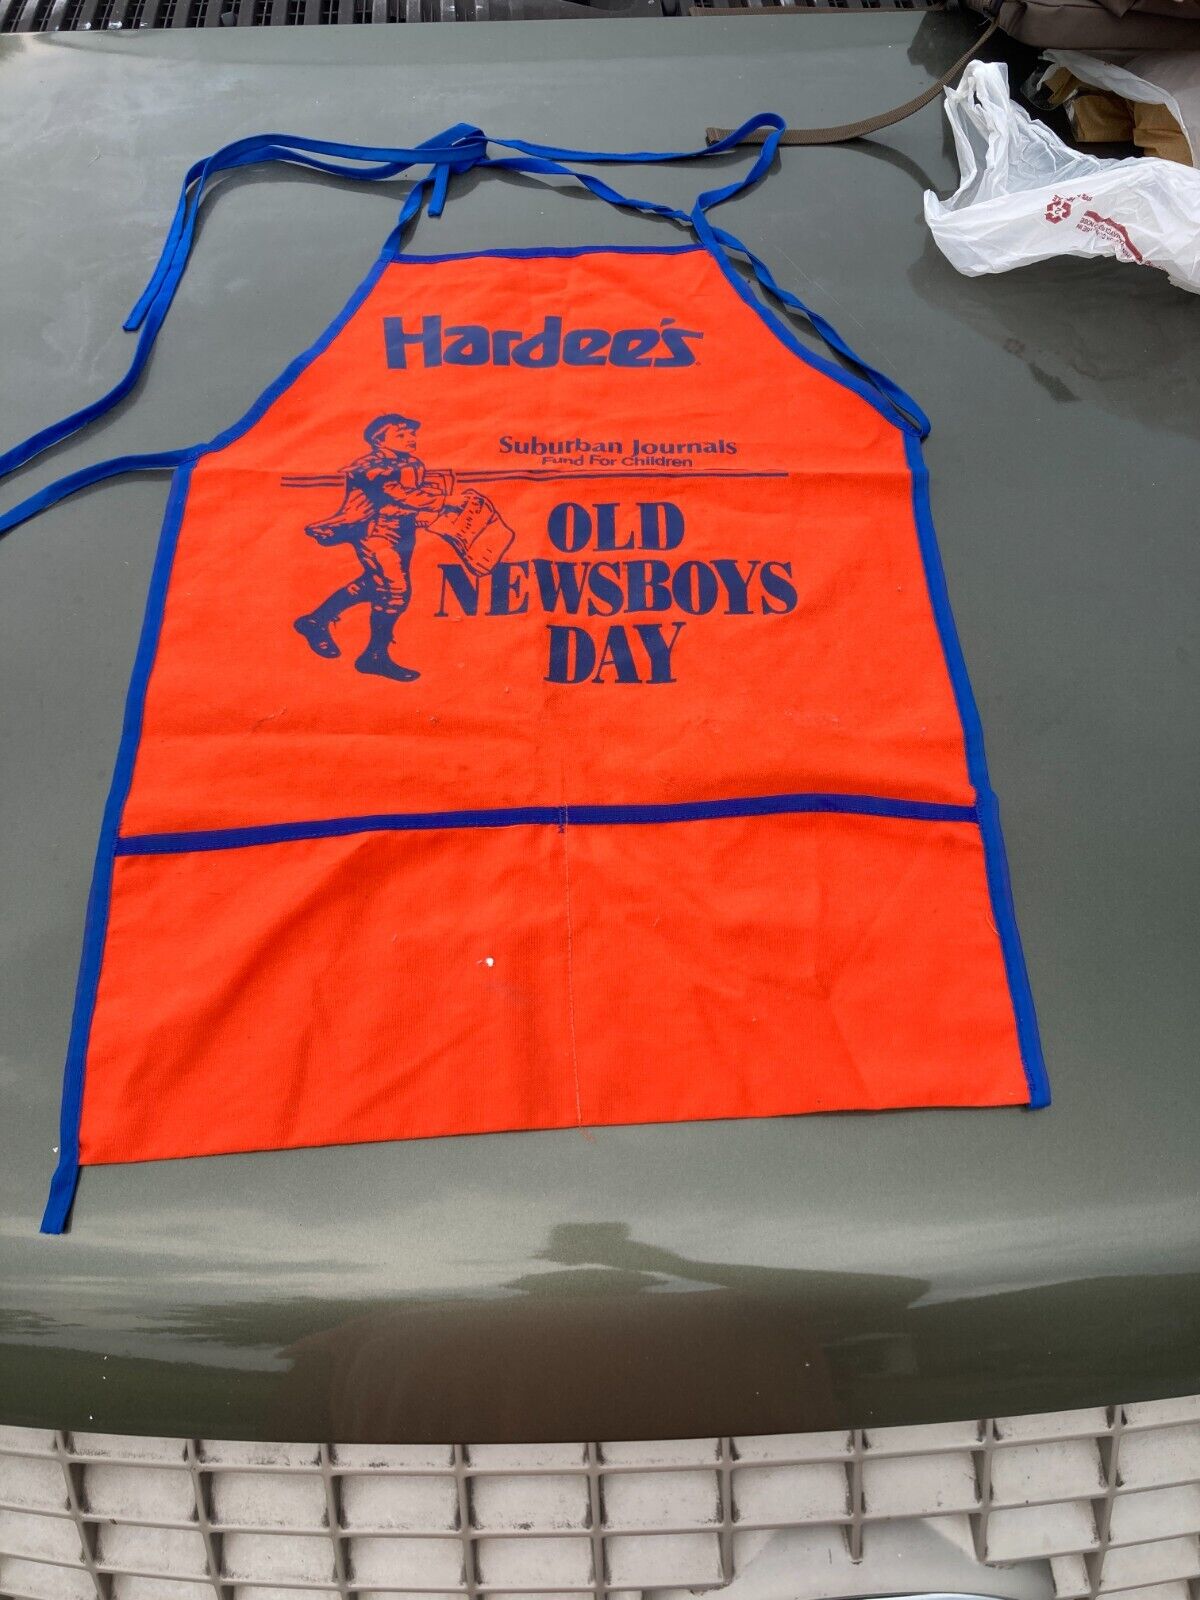 Hardee\'s Old Newsboys Day Apron Suburban Journals Promo Event 1990s? Employee